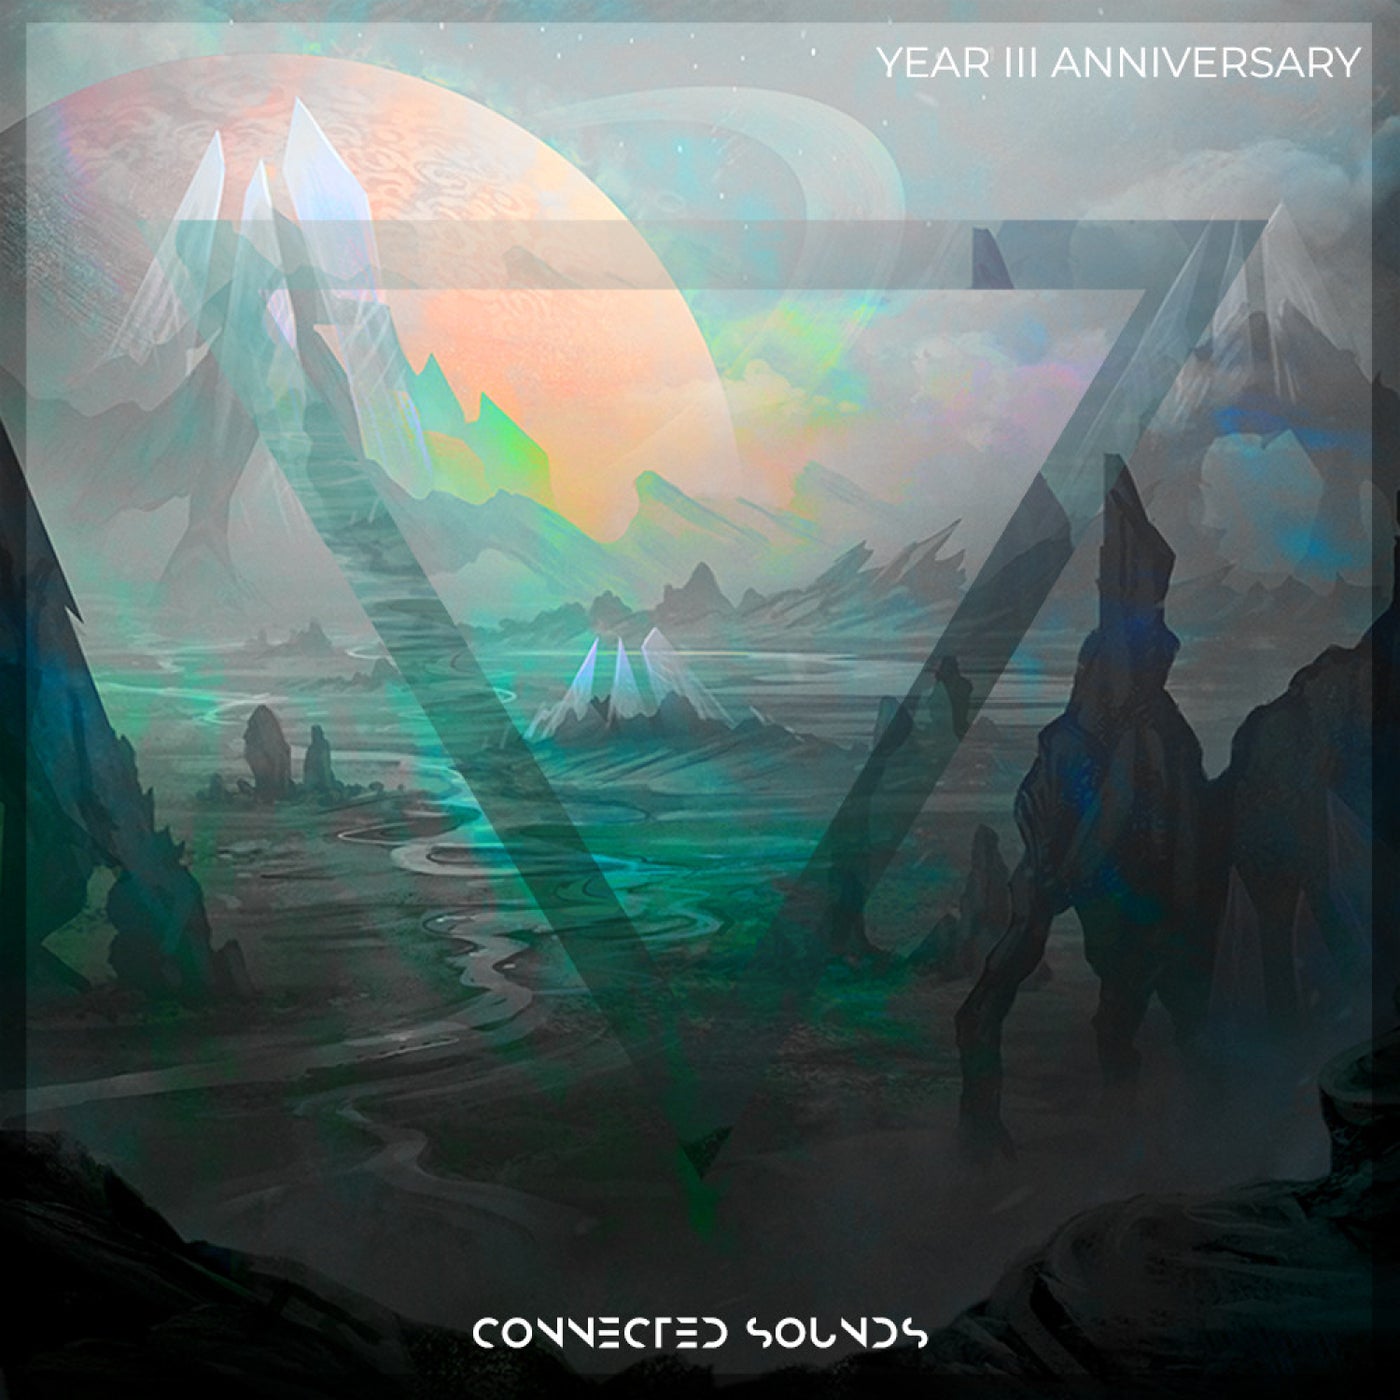 Connected sounds. Year 3 Anniversary - fragment.